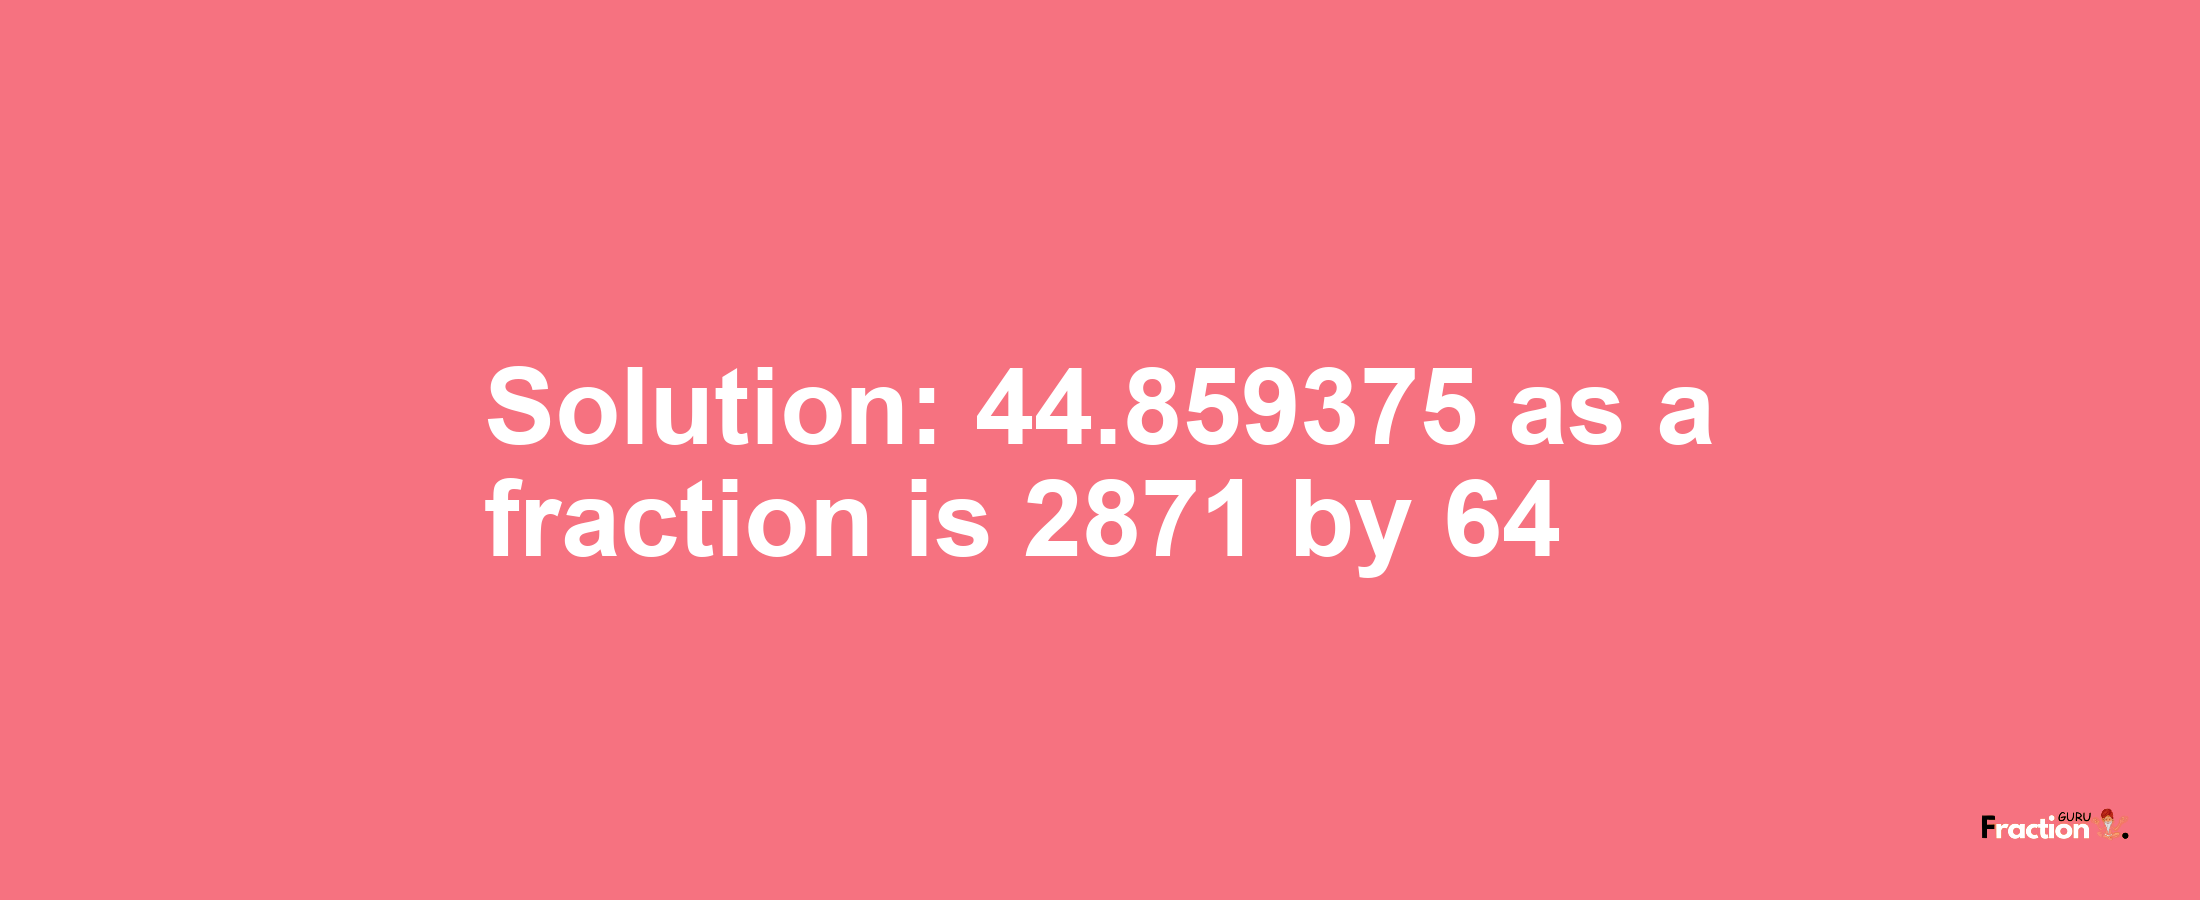 Solution:44.859375 as a fraction is 2871/64